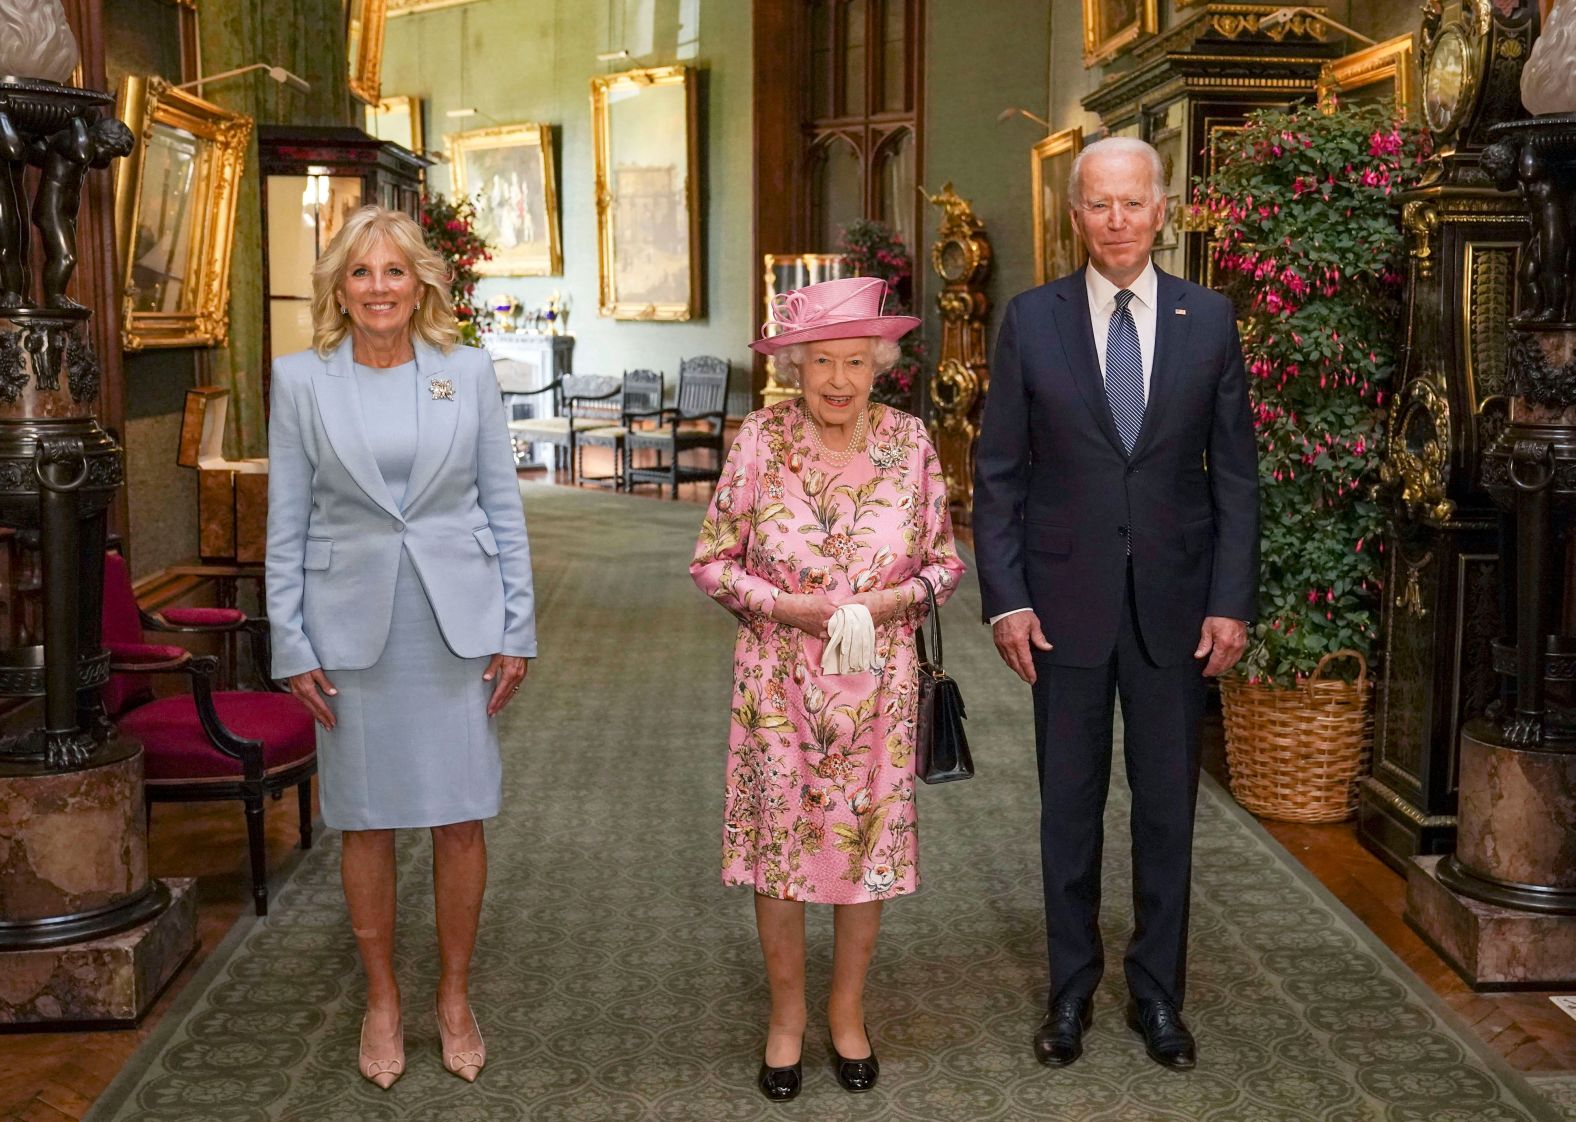 Biden and his wife, Jill, pose with Britain's Queen Elizabeth II during their visit to Windsor Castle on Sunday. The President and the Queen <a href="index.php?page=&url=https%3A%2F%2Fwww.cnn.com%2F2021%2F06%2F13%2Fpolitics%2Fpresident-biden-g7-day-3%2Findex.html" target="_blank">held private talks inside Windsor Castle,</a> and Biden later said he wished he could have spoken to her longer. "She was very generous," Biden said. He said he did not think she'd be insulted if he said she "reminded me of my mother in terms of the look of her and the generosity."